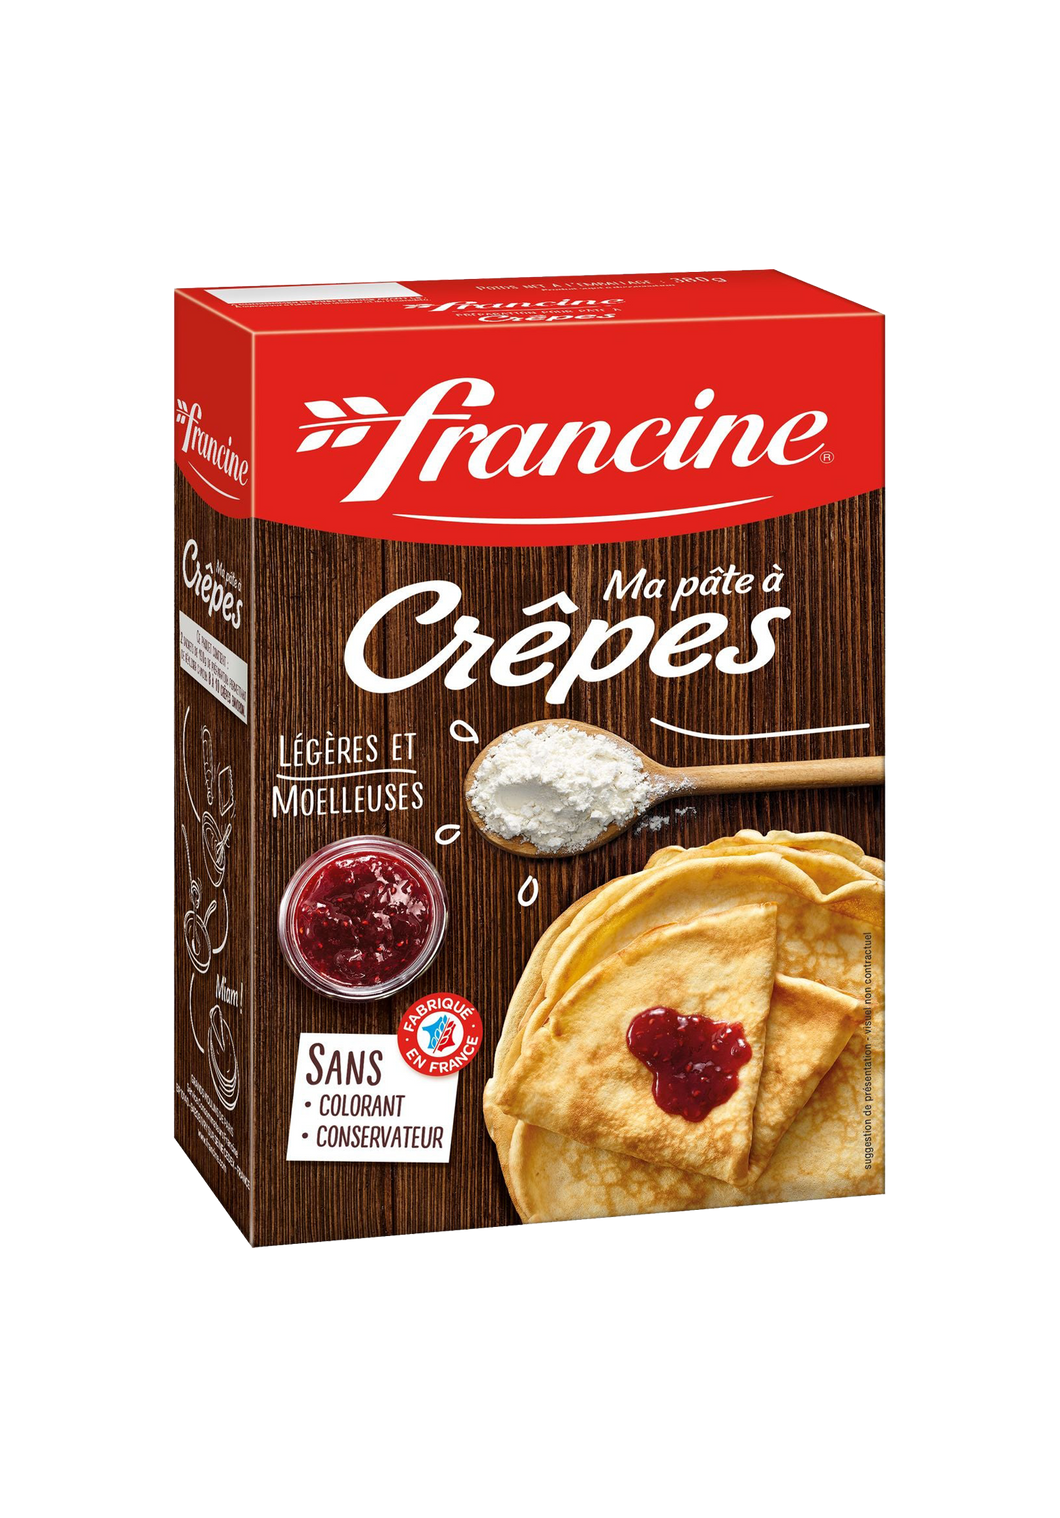 Francine Ma Pate a Crepes 380g